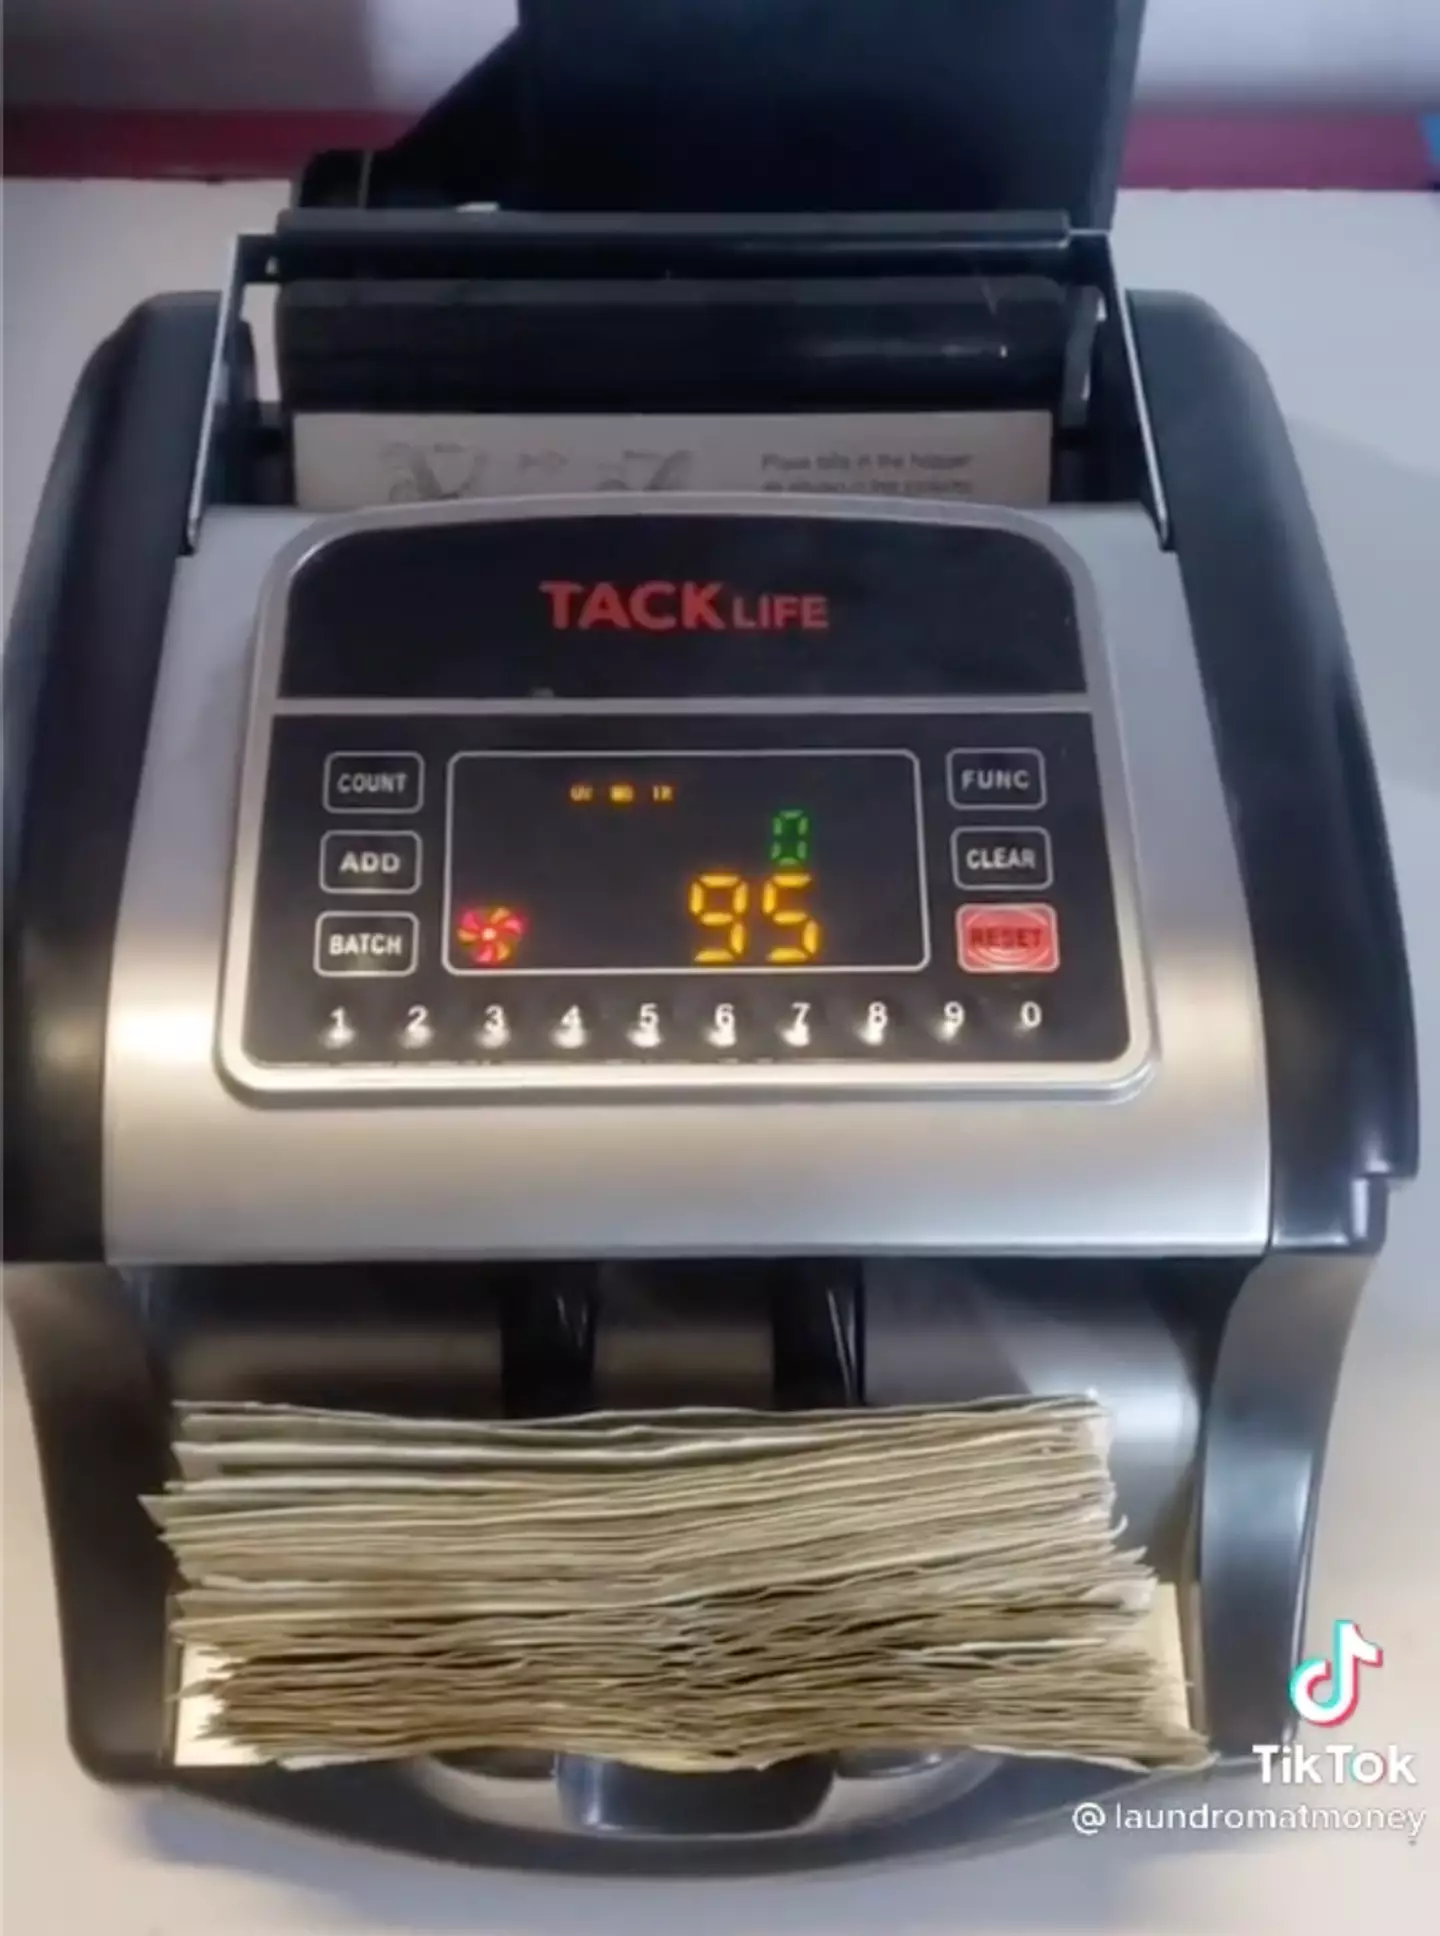 He makes plenty from bills alone, but that's before he counts the loose change. (@laundromatmoney/TikTok)